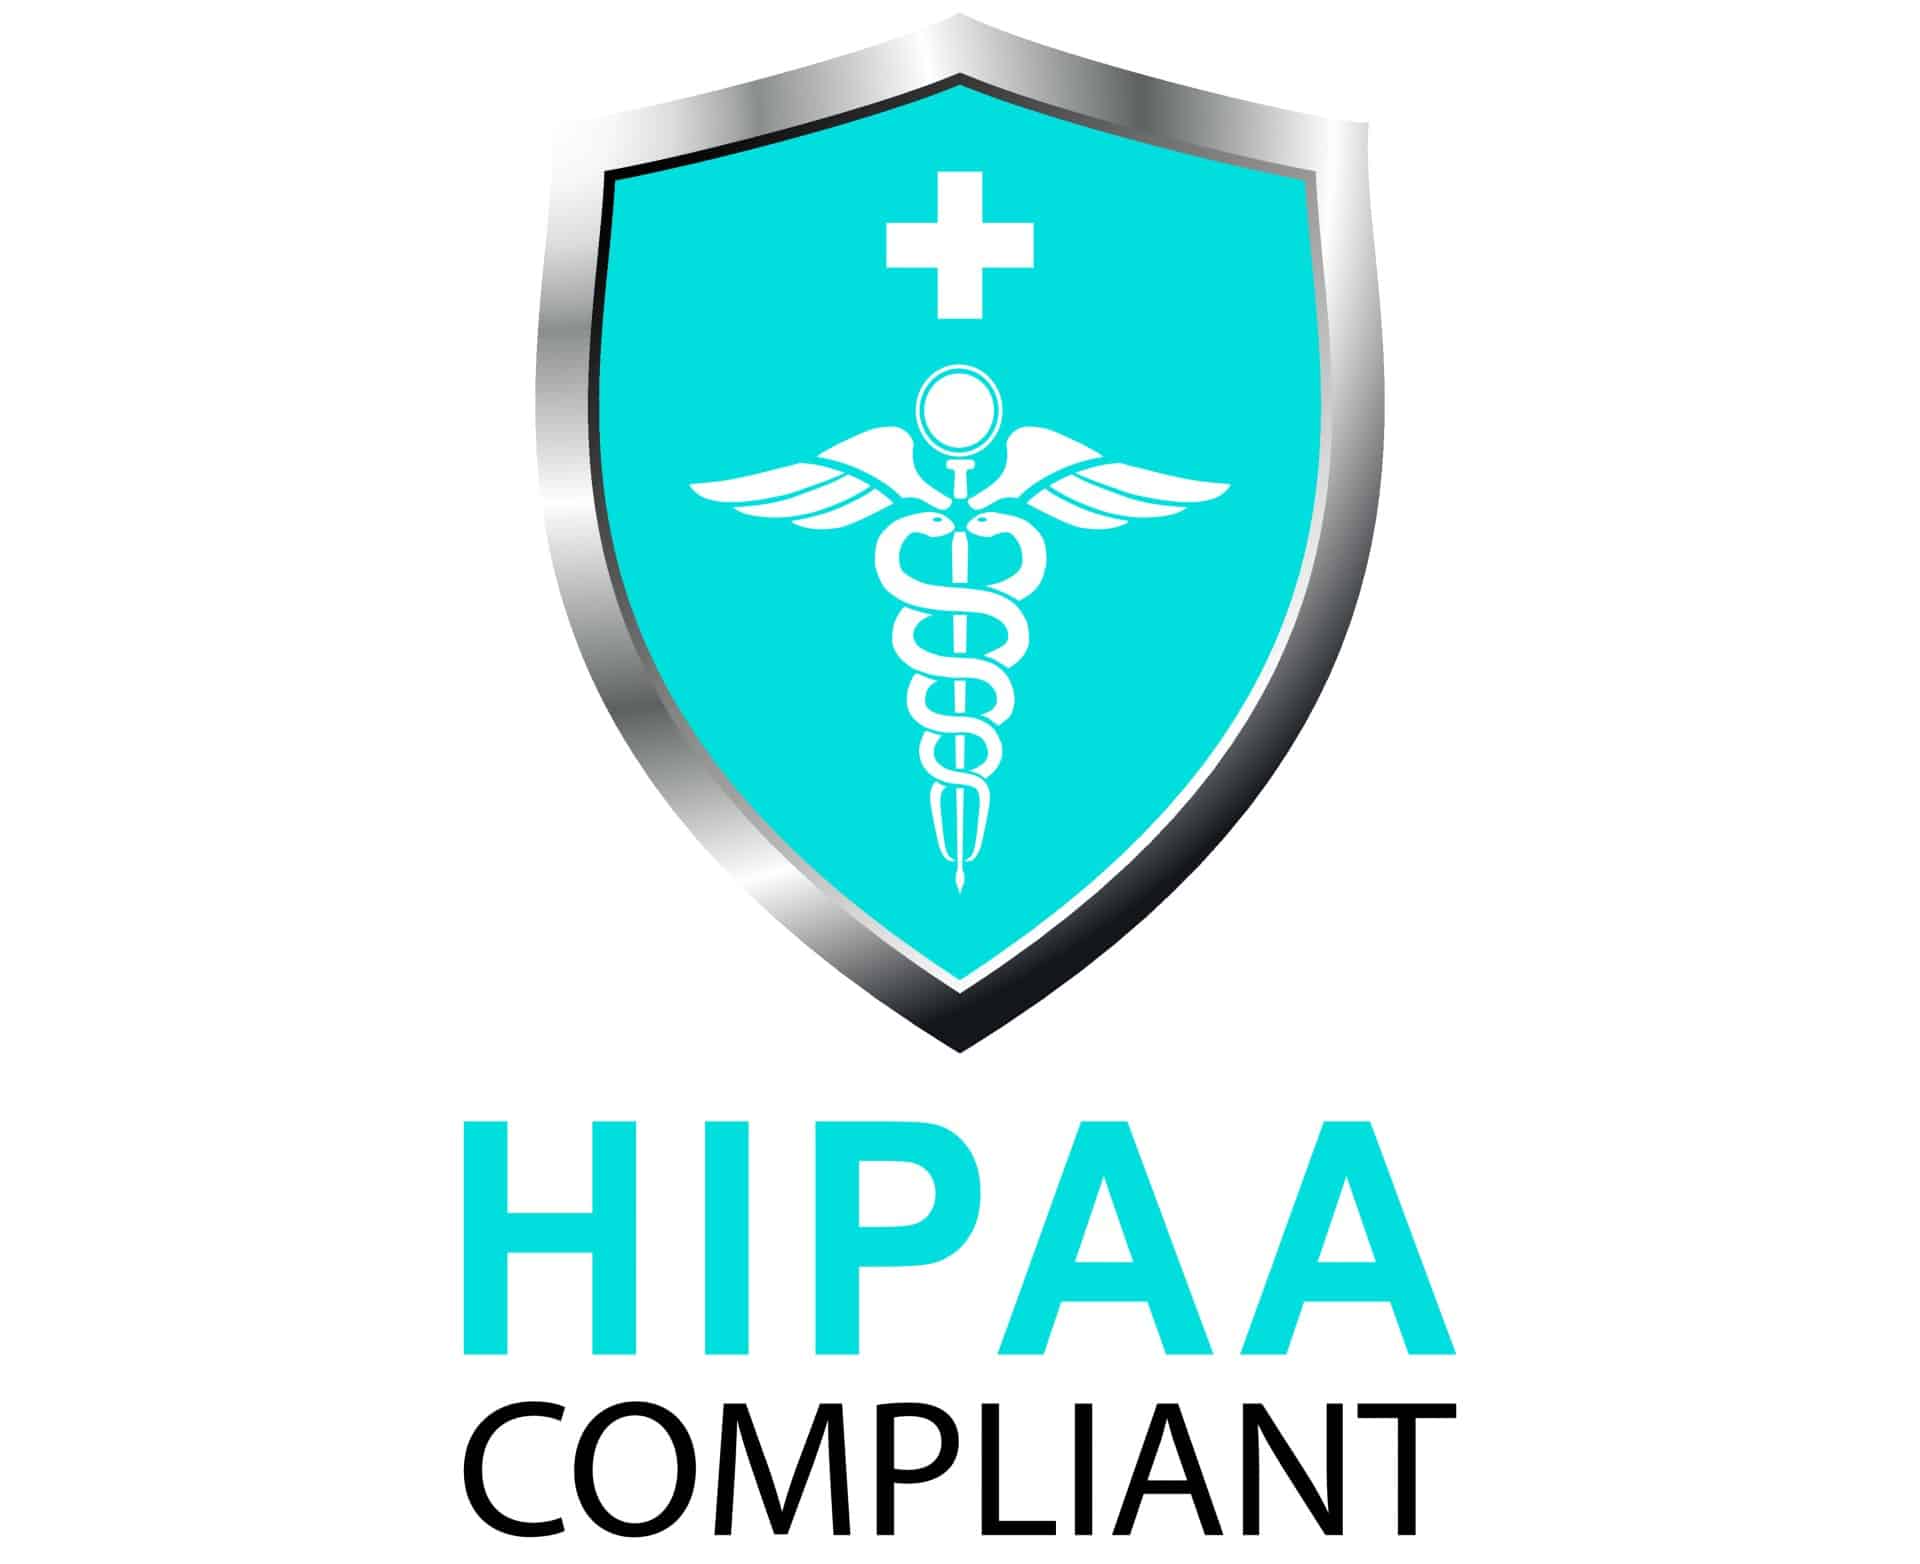 Every Athreon virtual scribe is HIPAA trained, and they must pass a background check. Regular HIPAA and cybersecurity training is required. All our technology and systems are HIPAA compliant, and we sign BAA agreements with our healthcare clients.